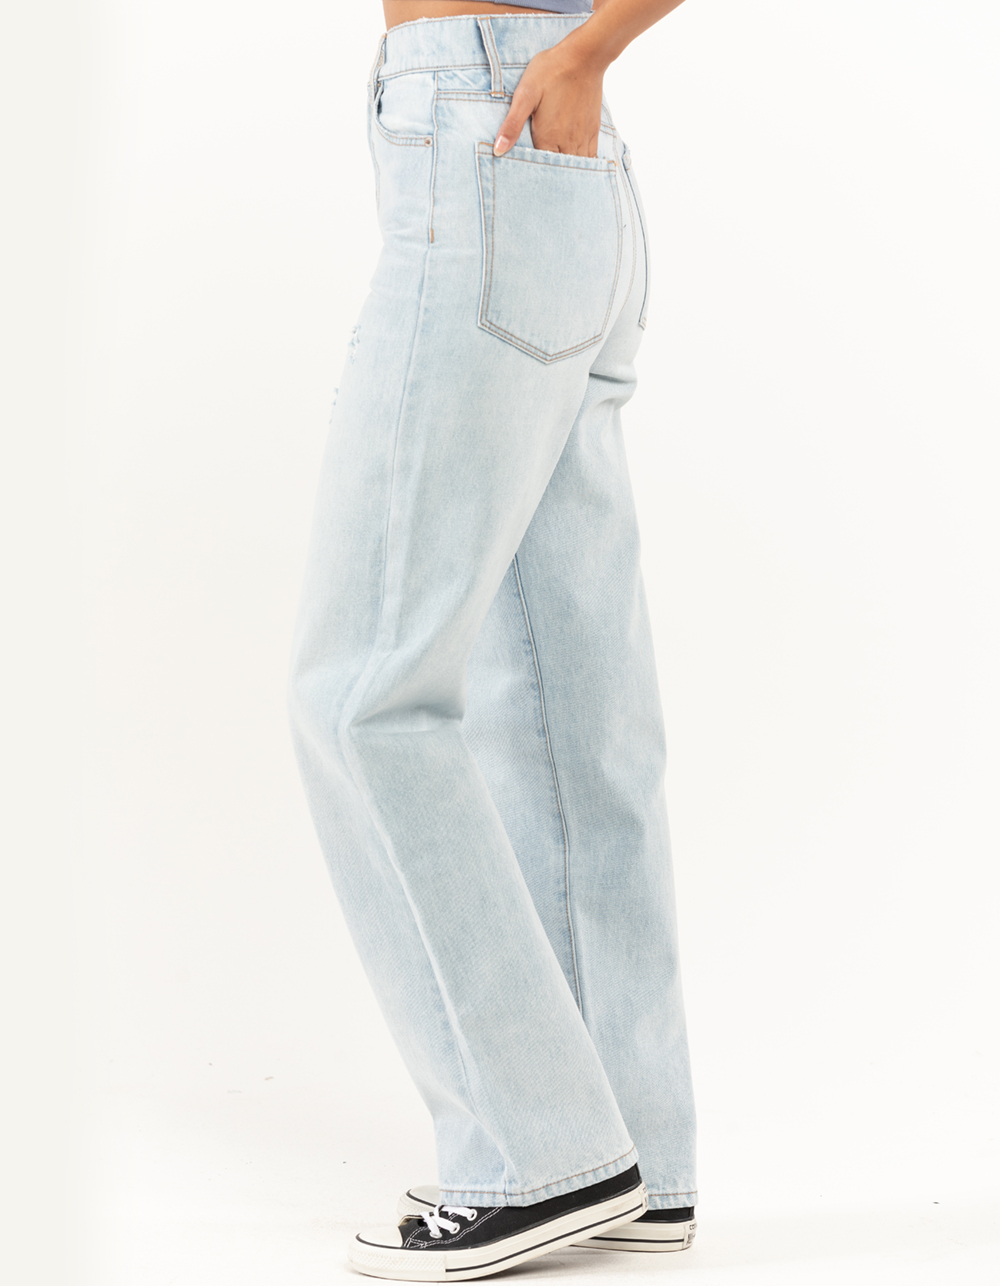 RSQ Womens High Rise Baggy Jeans - LIGHT VINTAGE WASH | Tillys